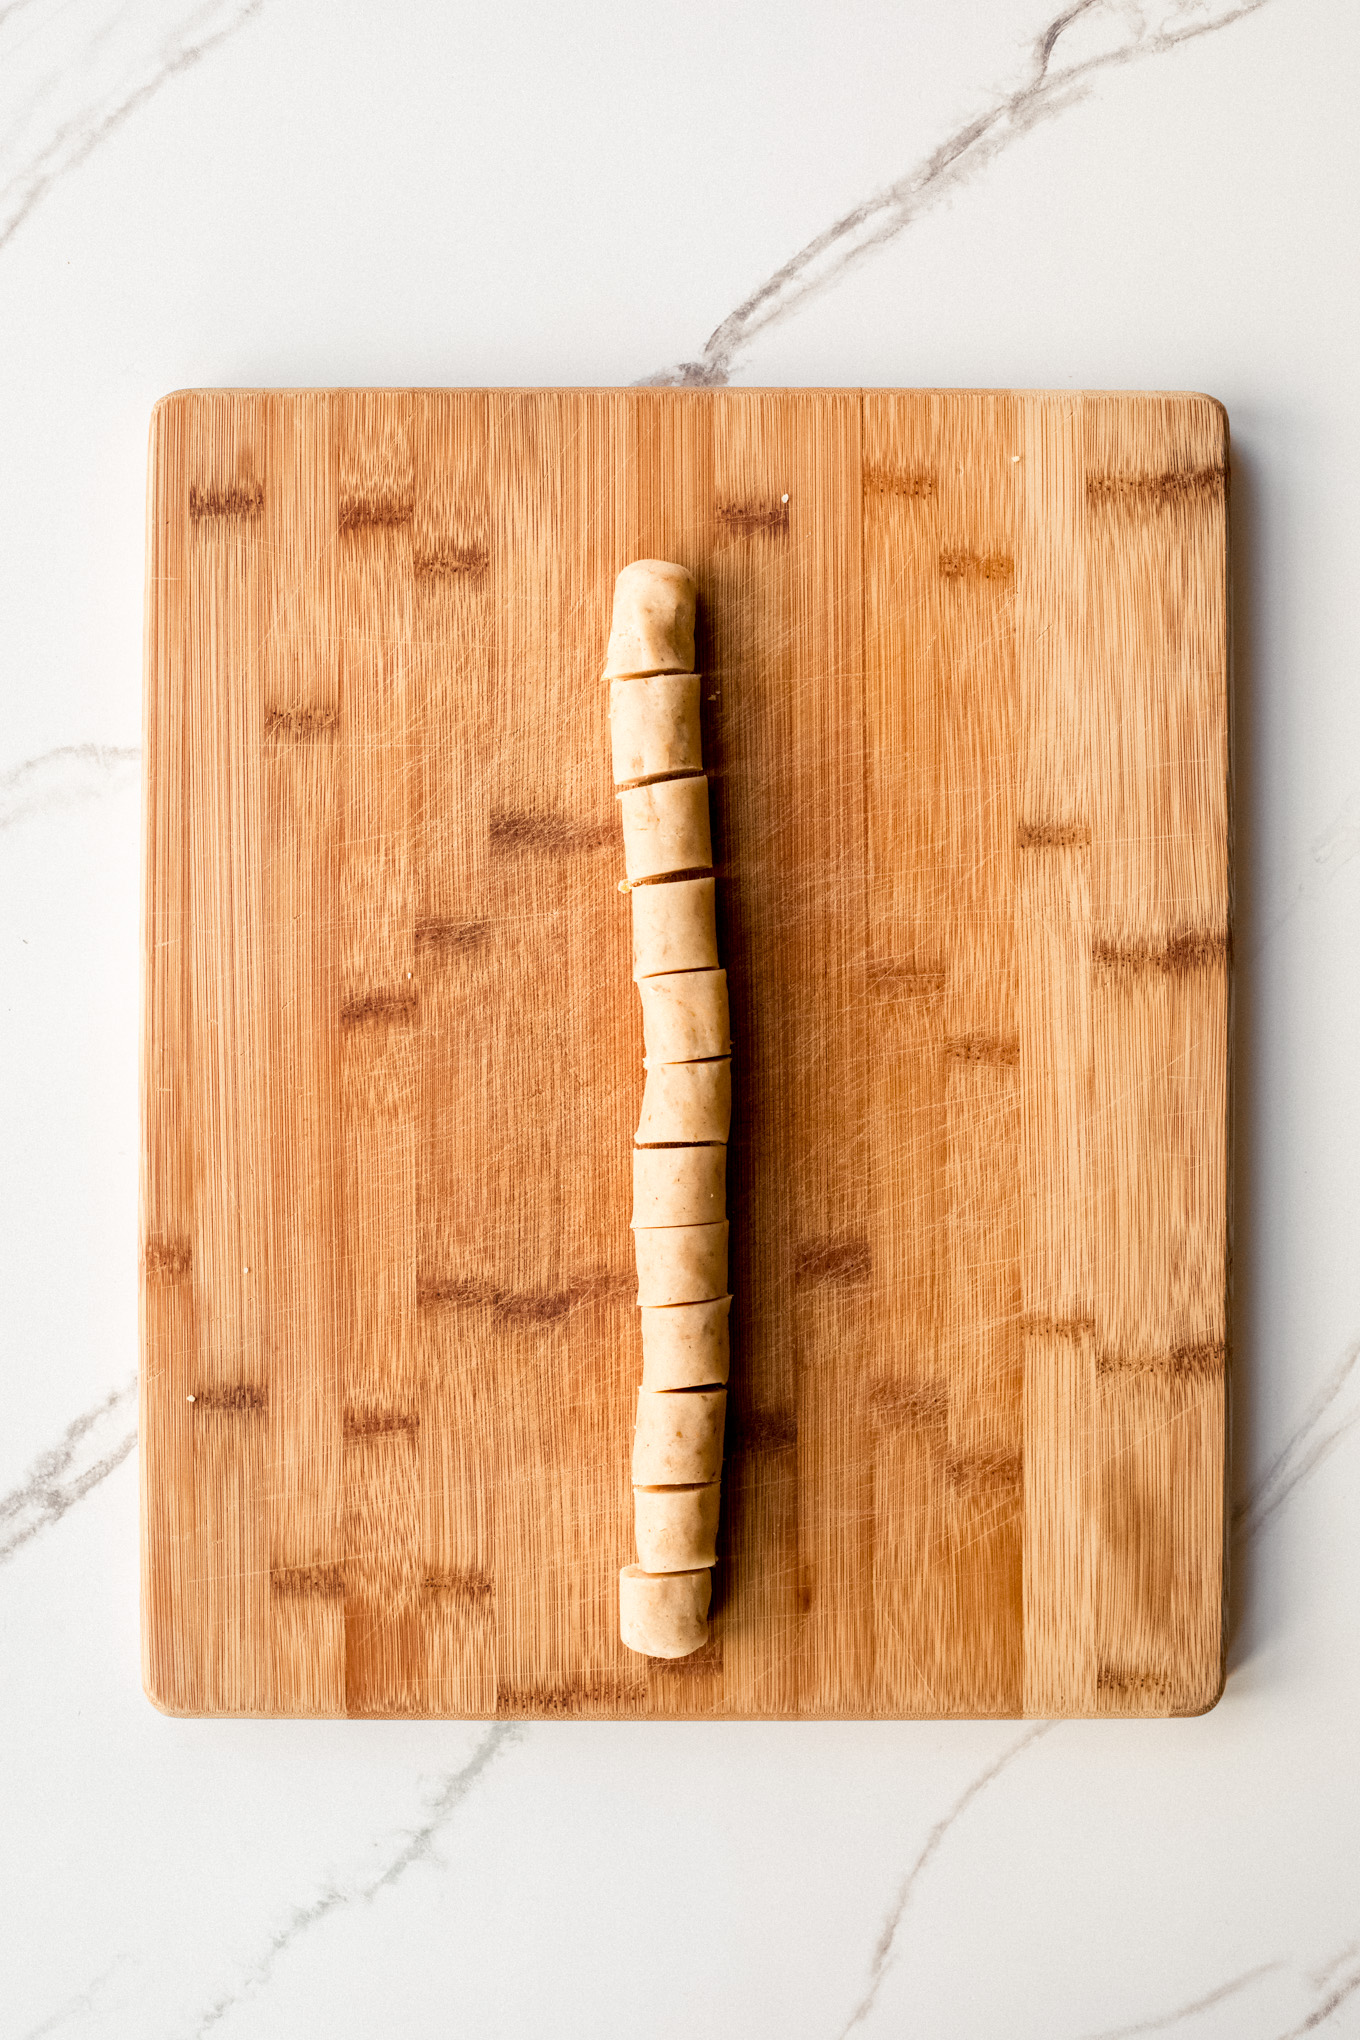 dough formed into a rope on a wooden board.